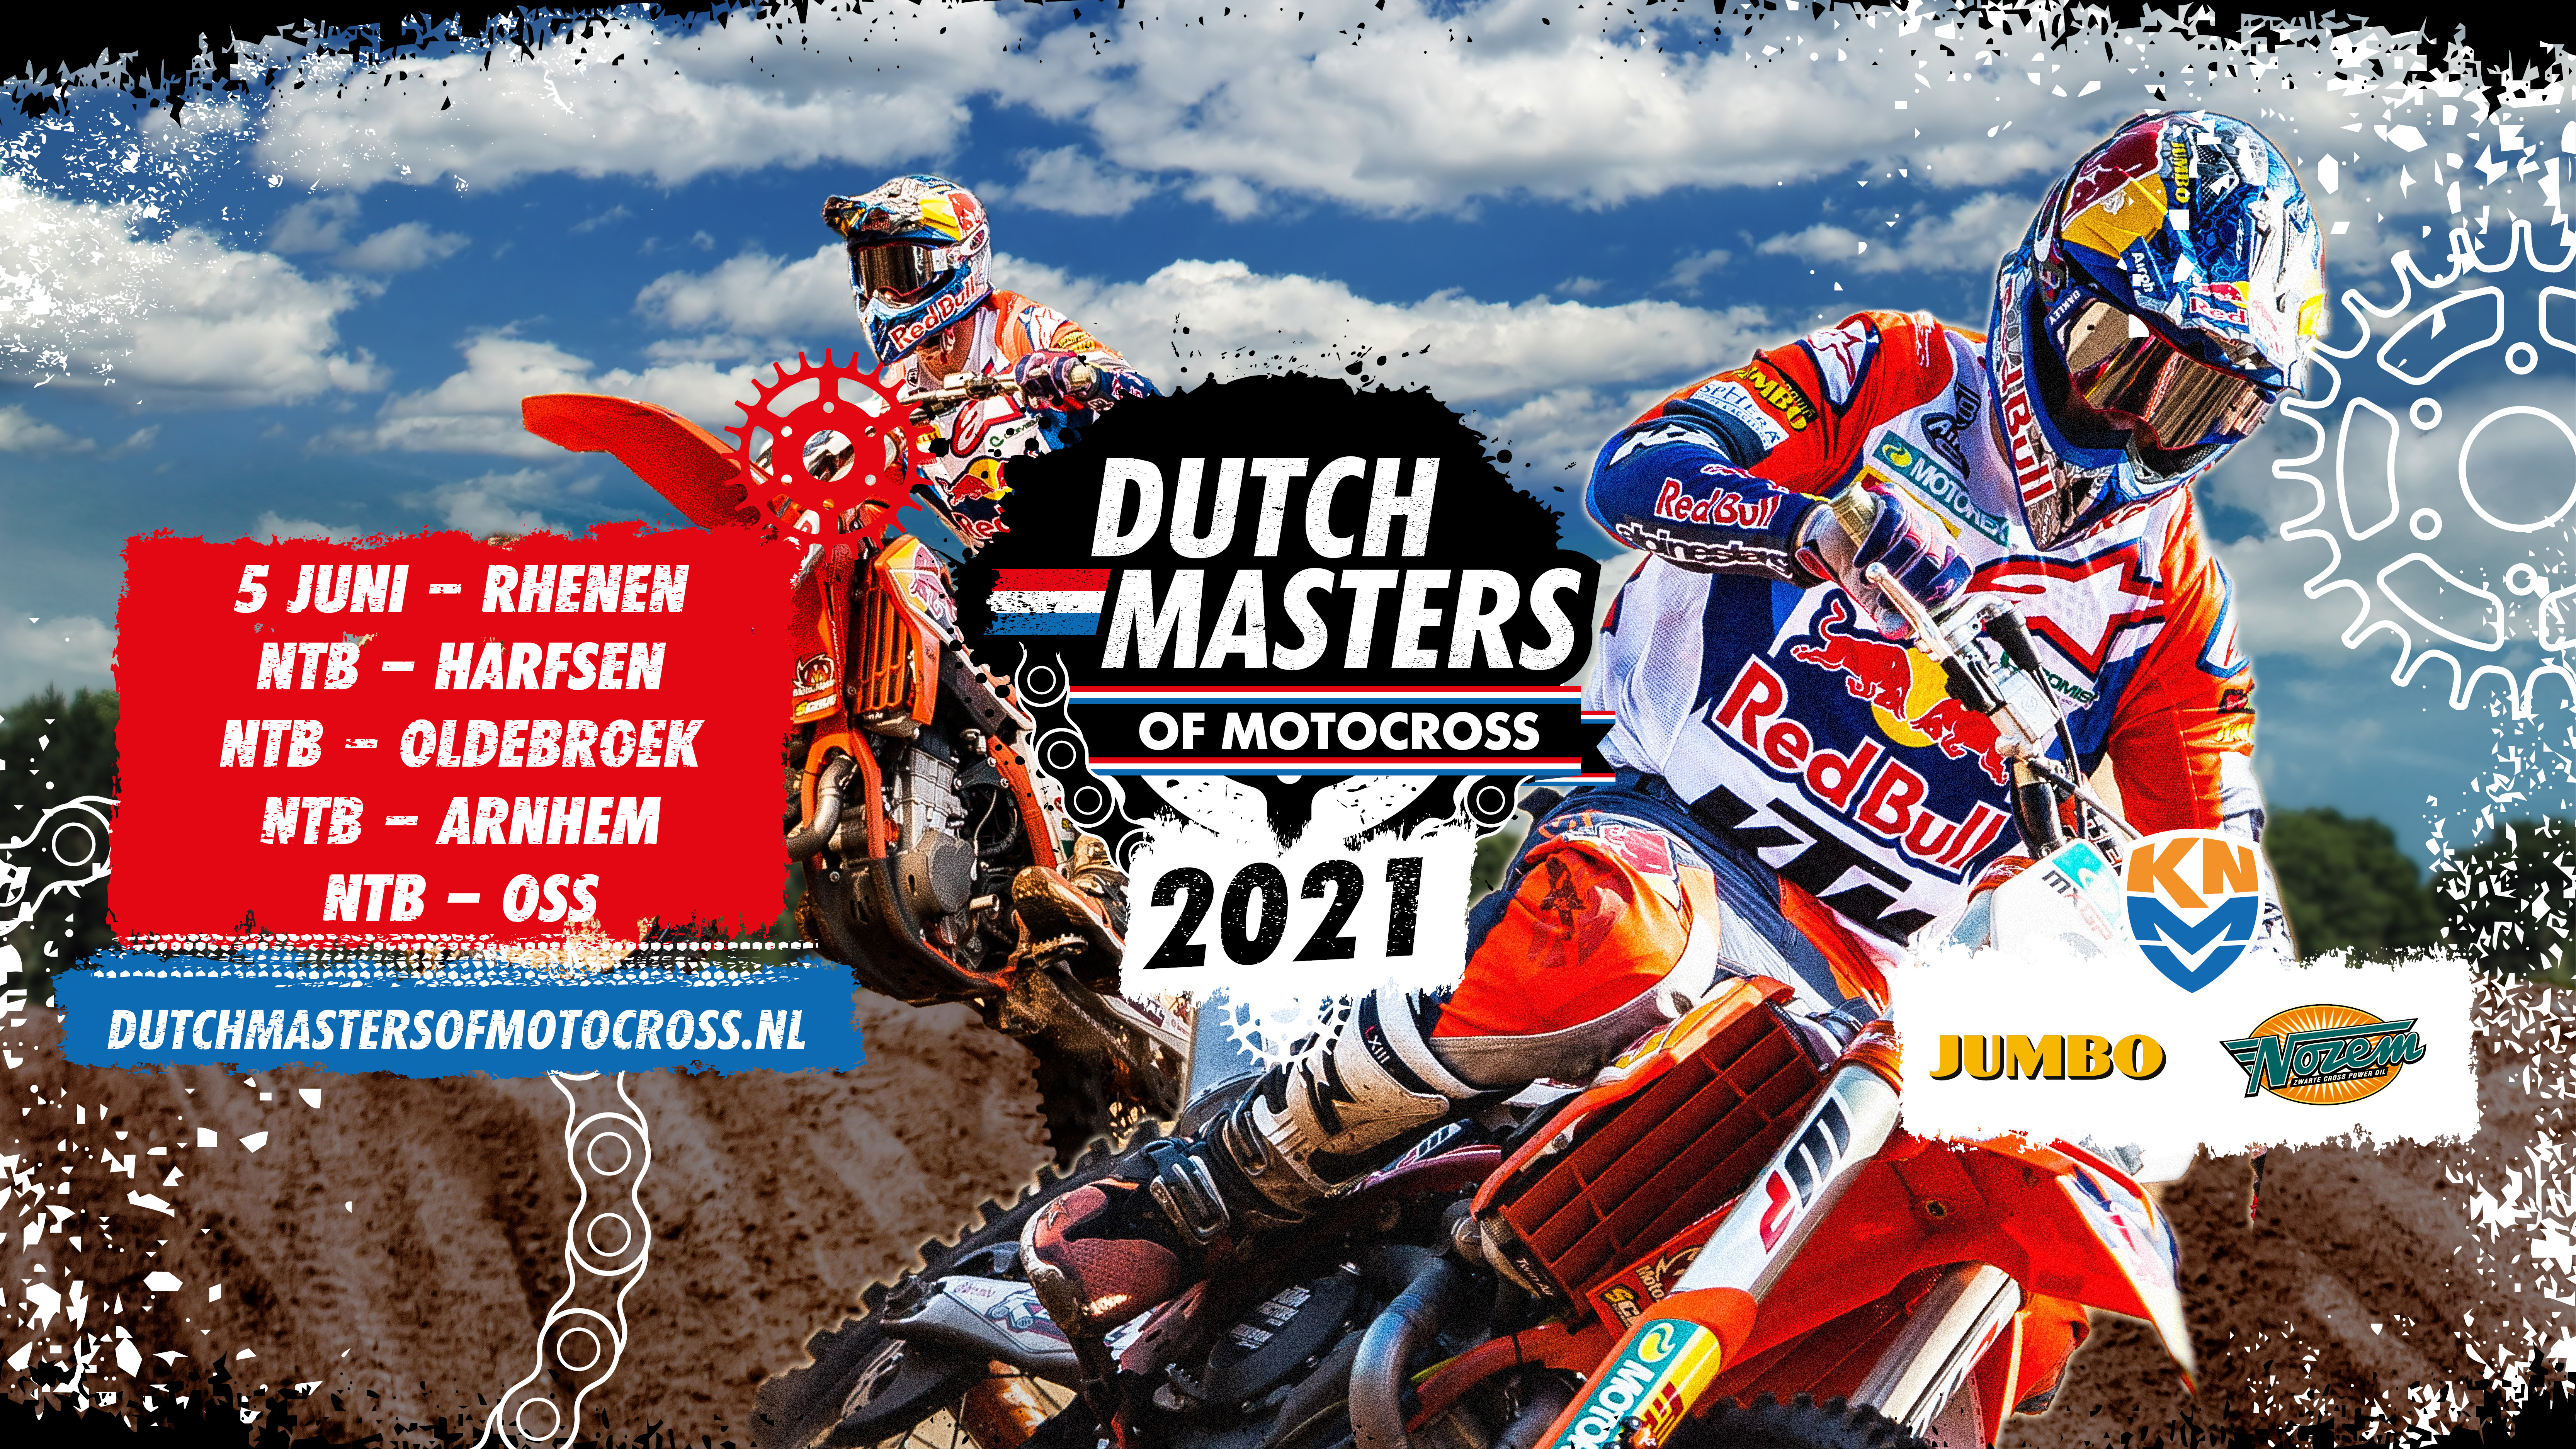 Dutch Masters Of Motocross '21 - Facebook Visual 1920x1080px Alle data 26-03-21